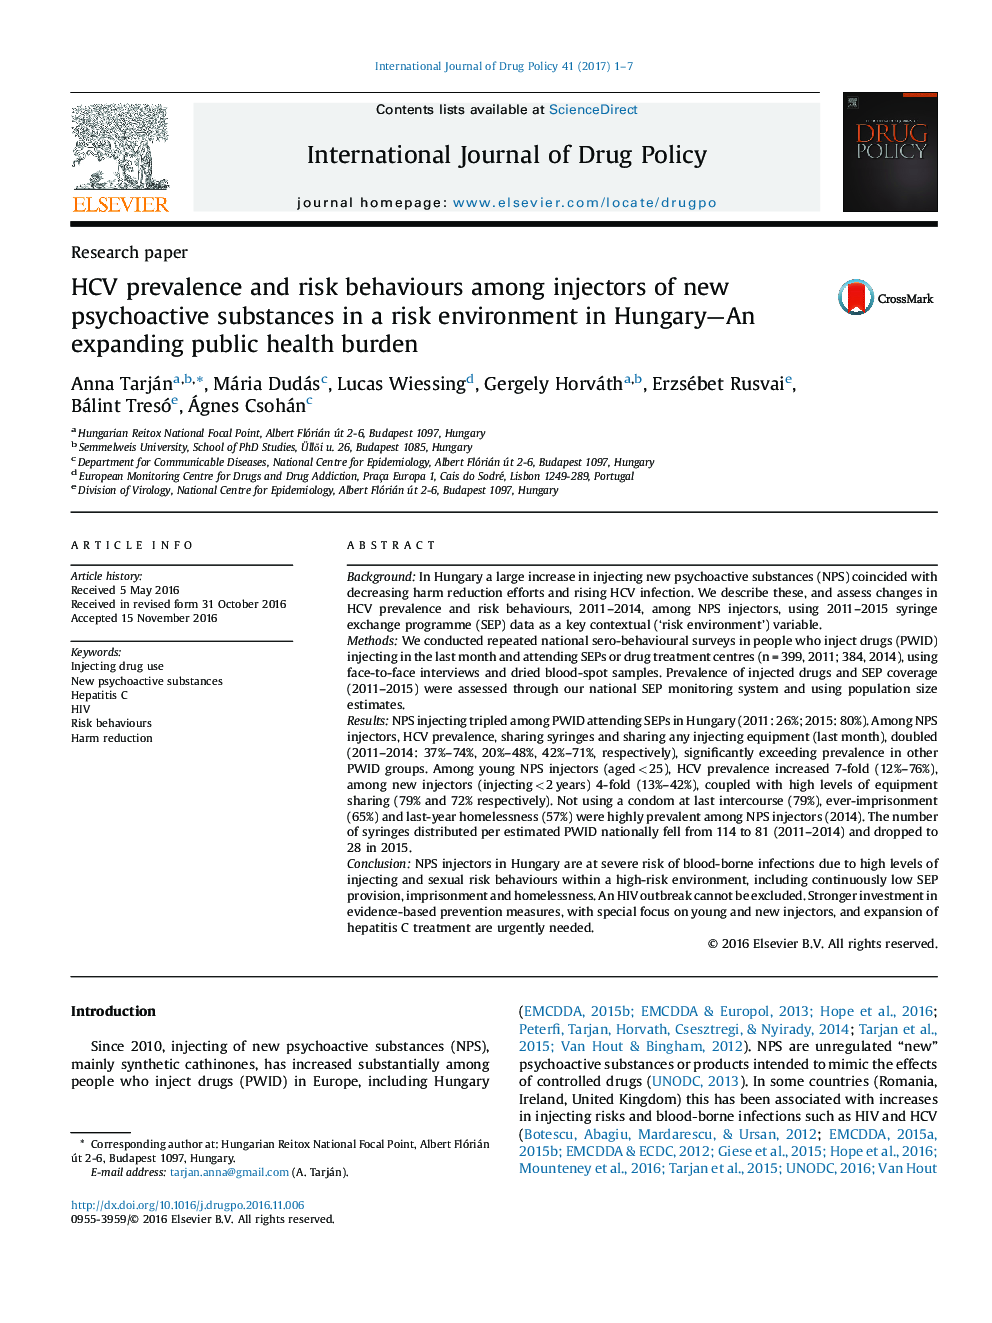 HCV prevalence and risk behaviours among injectors of new psychoactive substances in a risk environment in Hungary-An expanding public health burden